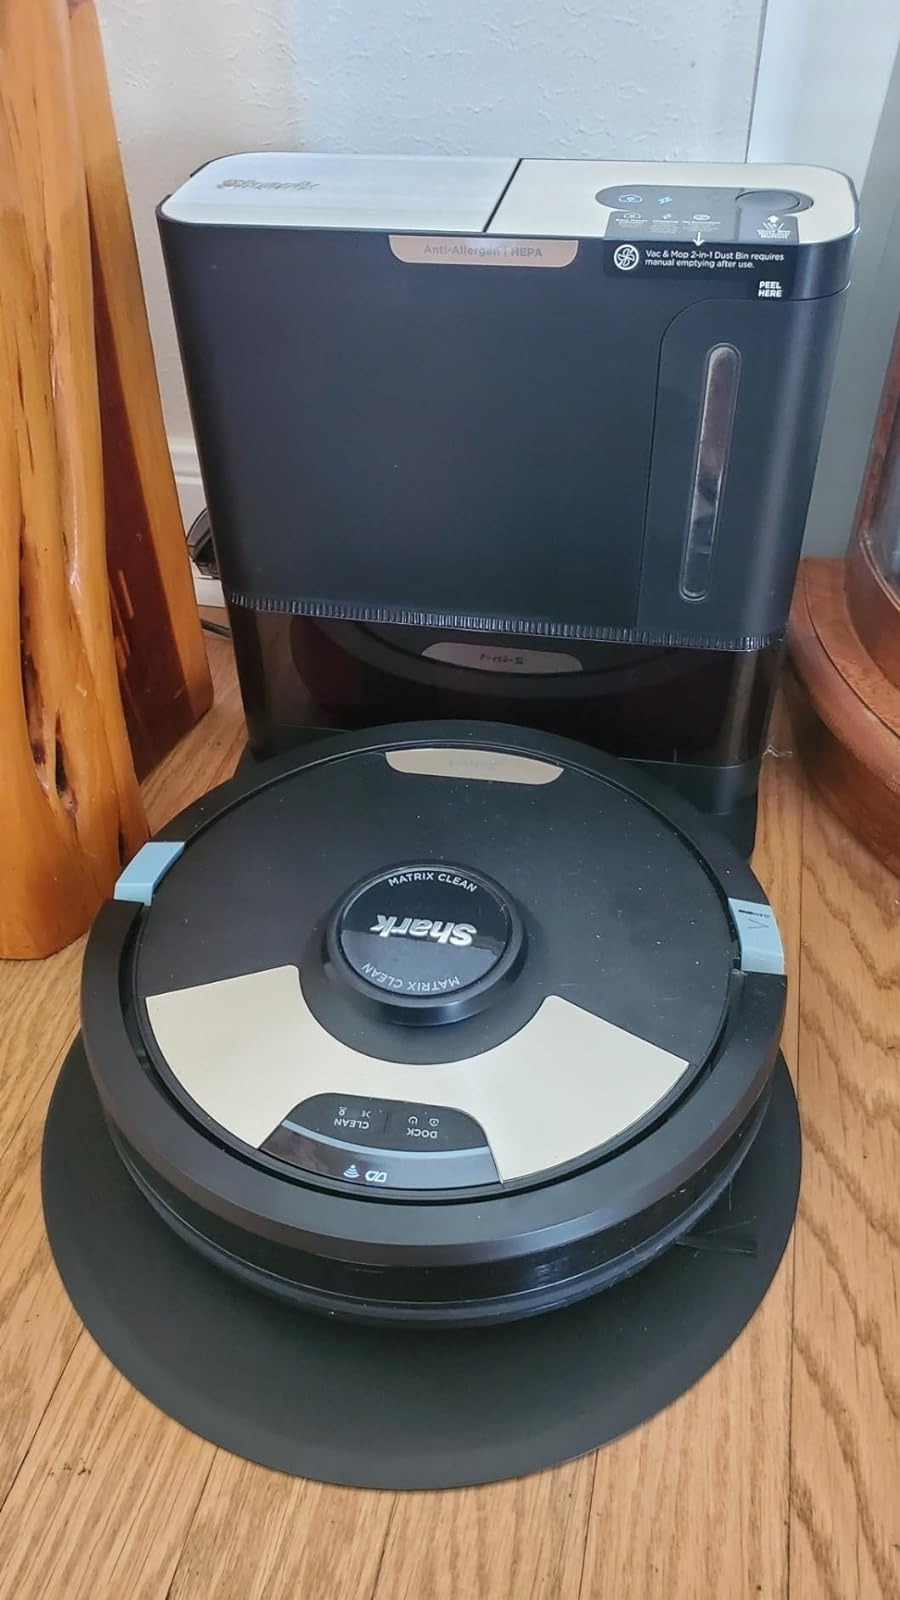 A robot vacuum cleaner is positioned in front of a stationary air conditioner unit in a home setting